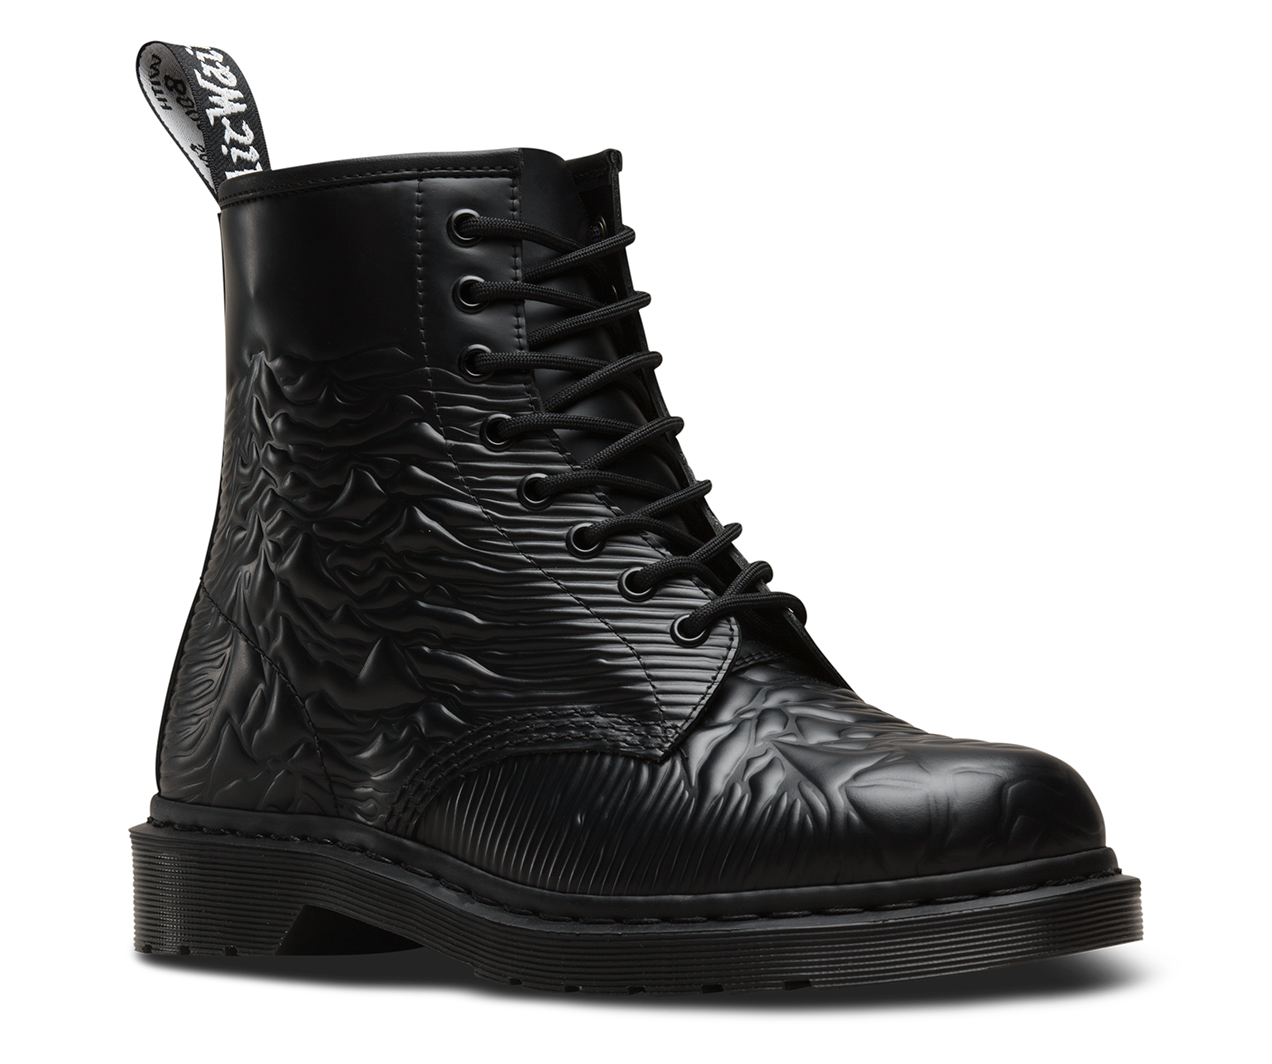 Dr Martens selling docs featuring Peter Saville's iconic artwork the dj